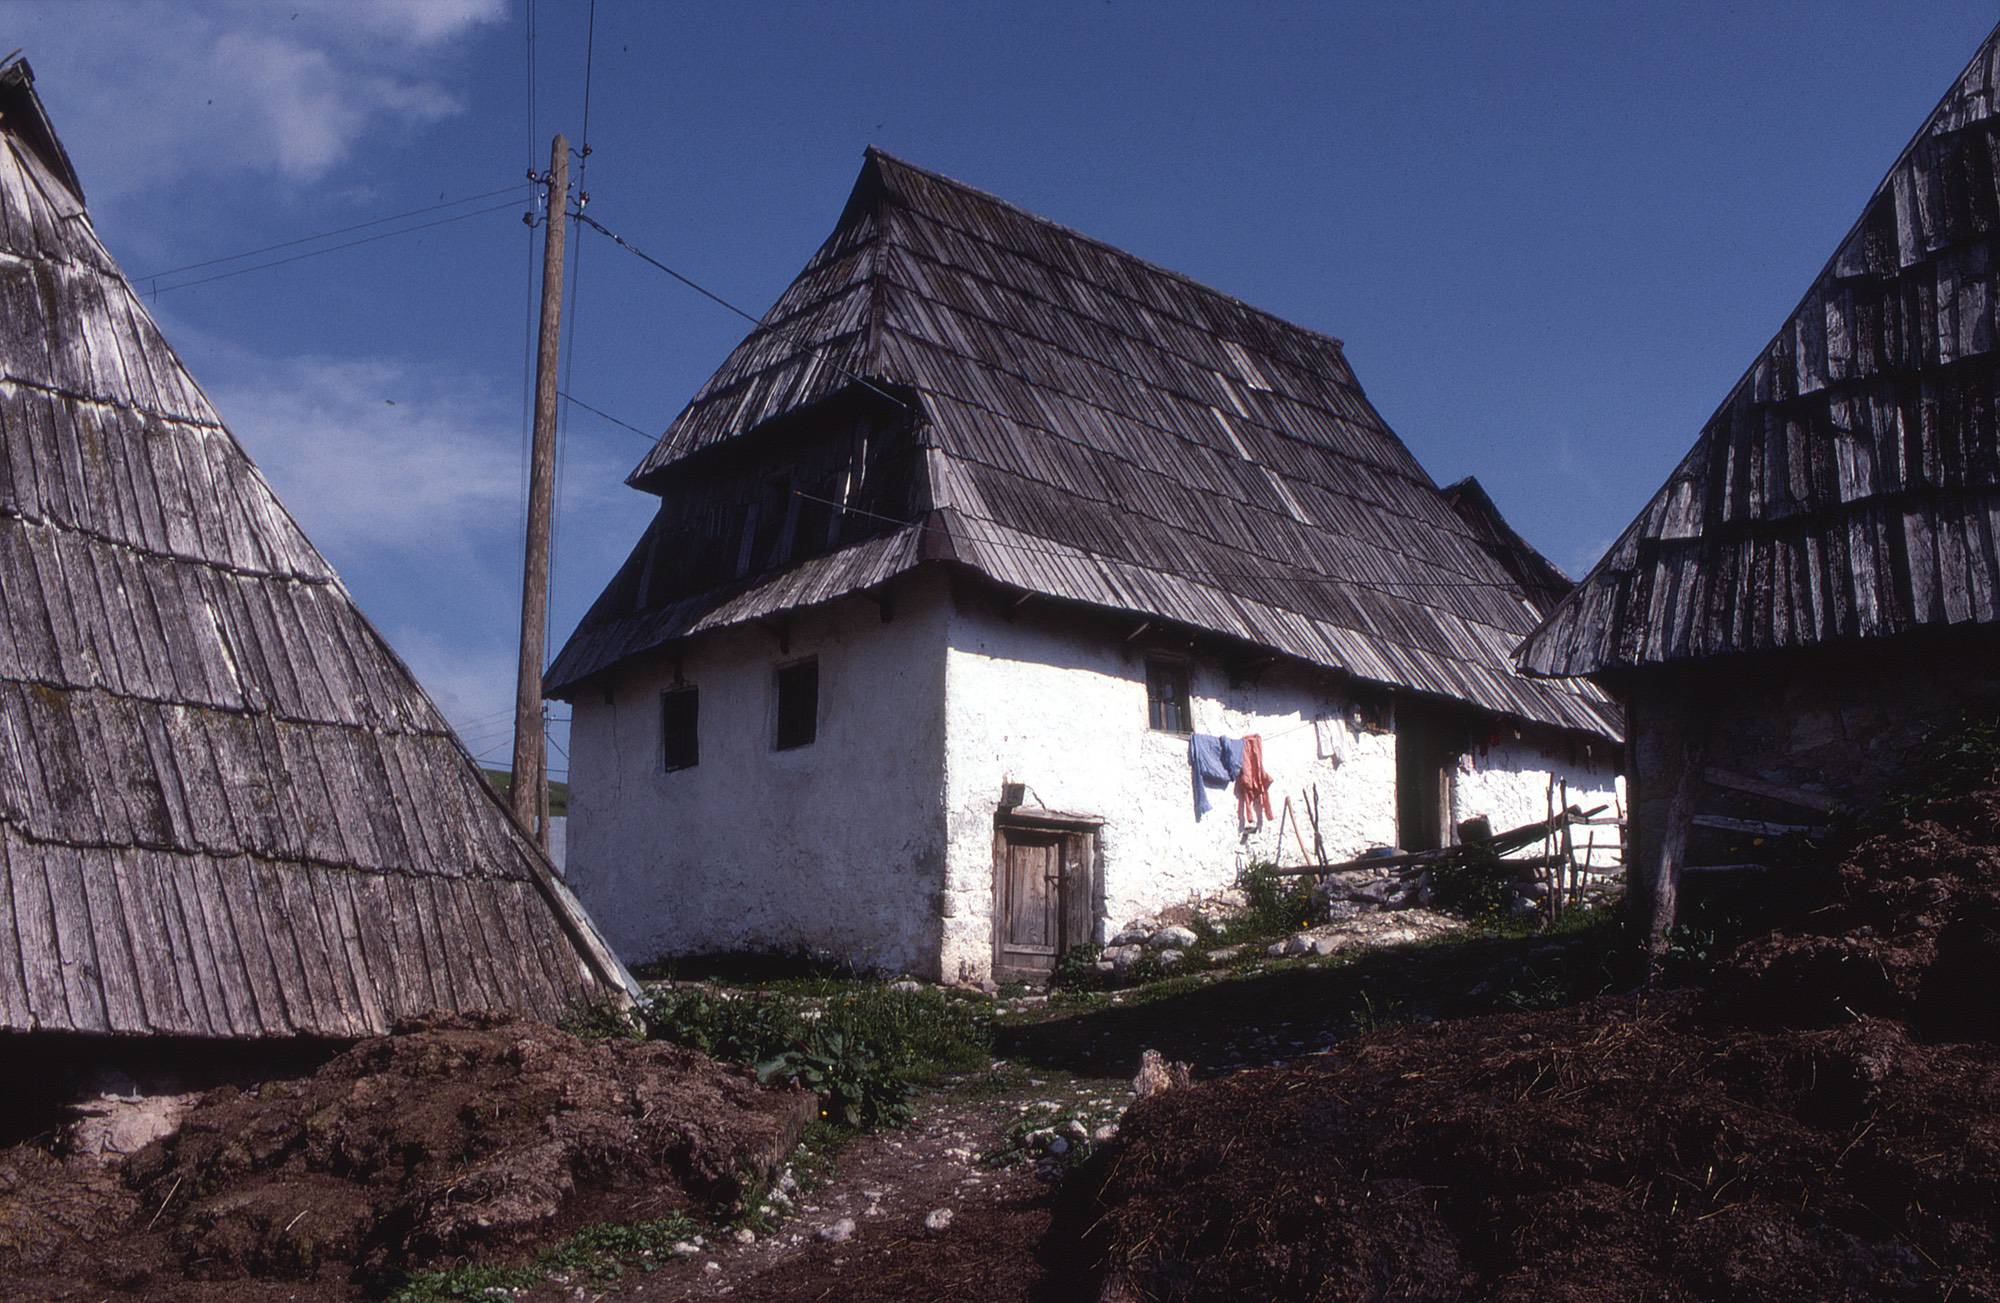 <p>In the highland villages around Sarajevo a local type of Dinaric house has an attic room set within the steeply pitched roof volume, with a dormer window providing light and views. According to M. Kadić (1967), a specialist on the rural vernacular architecture of Bosnia and Herzegovina, these attic spaces were called čardaci (chardaks), and they typically provided sleeping quarters for young couples in an extended household.</p>